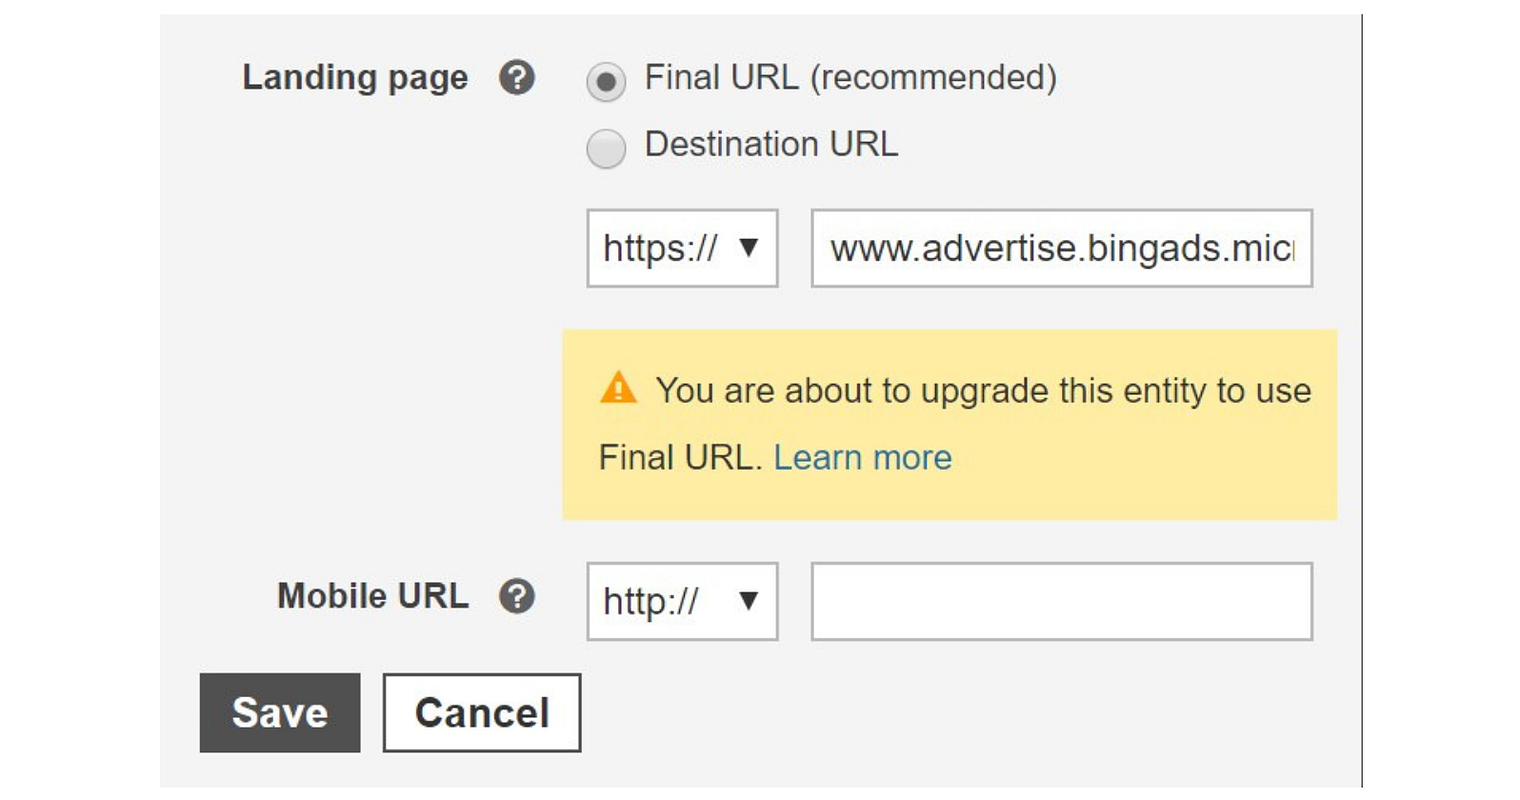 Bing Ads Will No Longer Serve Entities With Destination URLs By the End of 2019